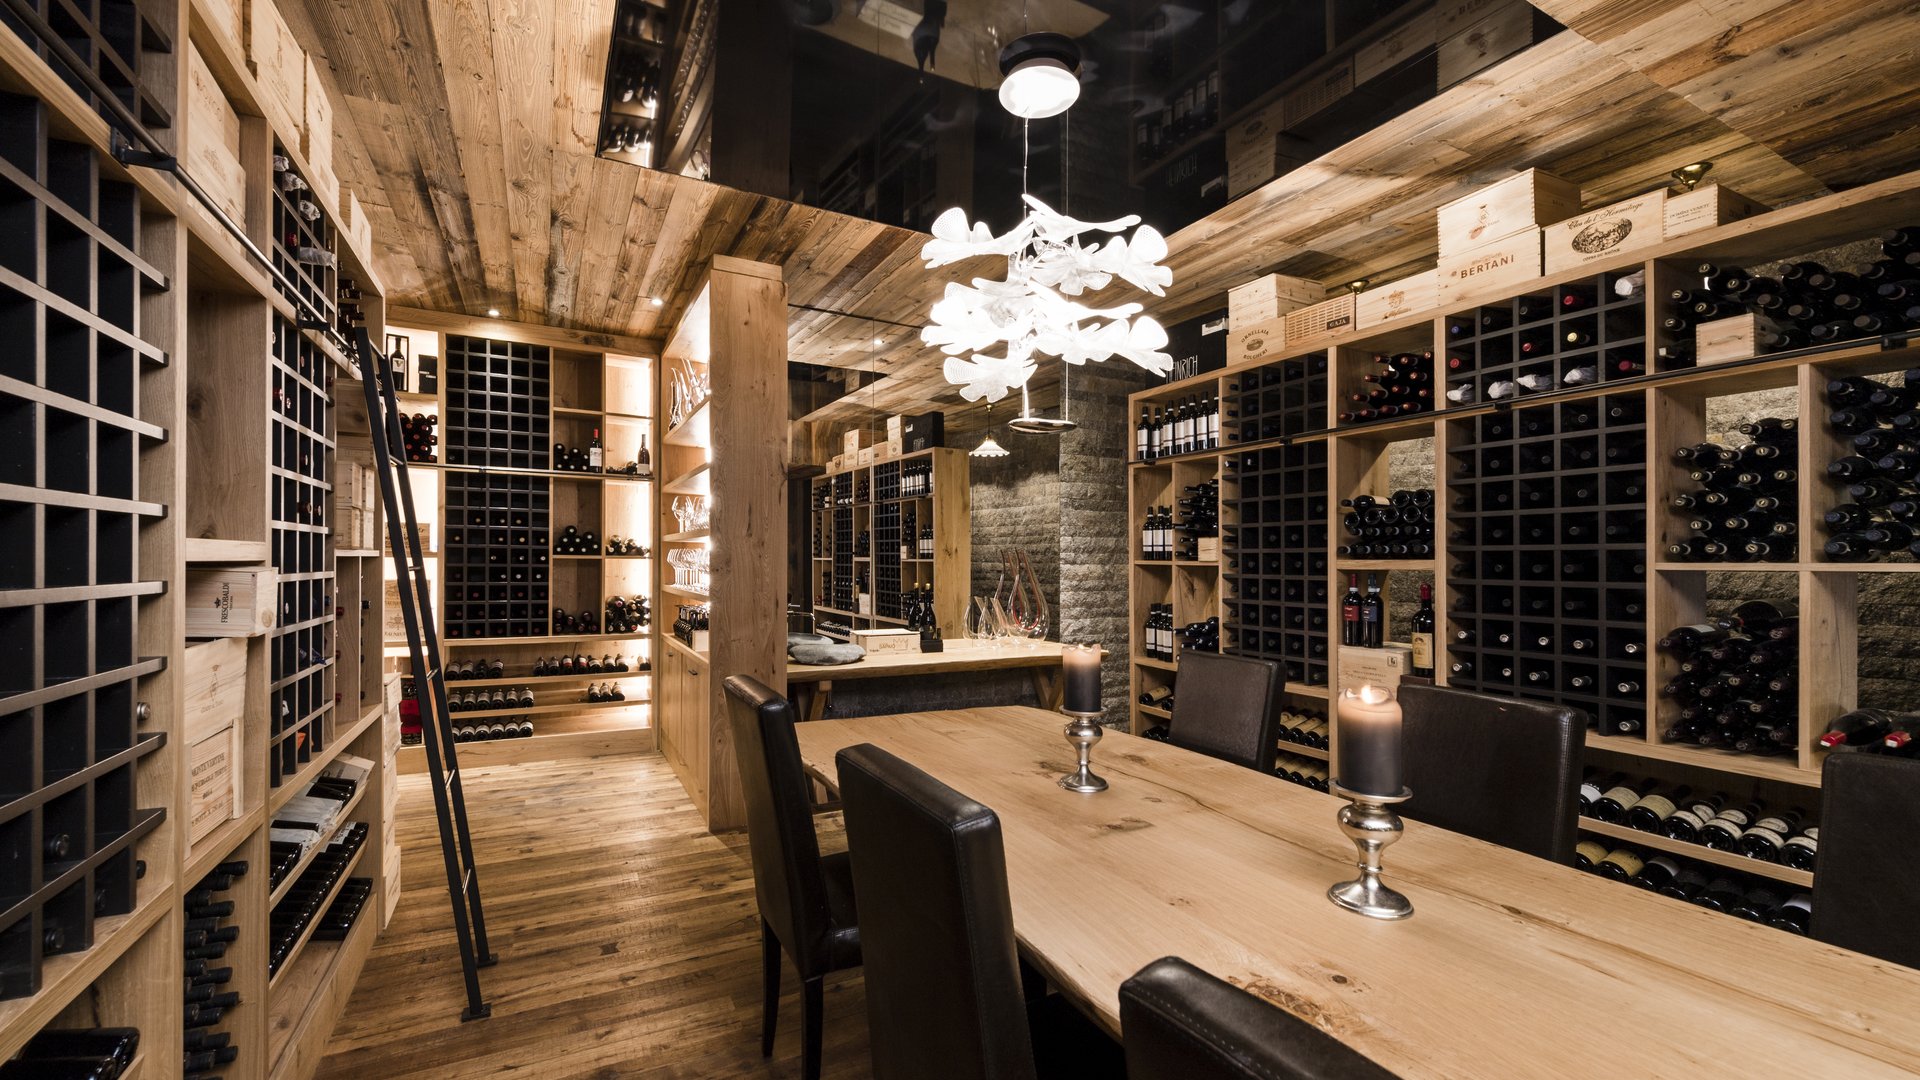 A hotel in Val Passiria/Passeiertal with 4-star S vinotheque